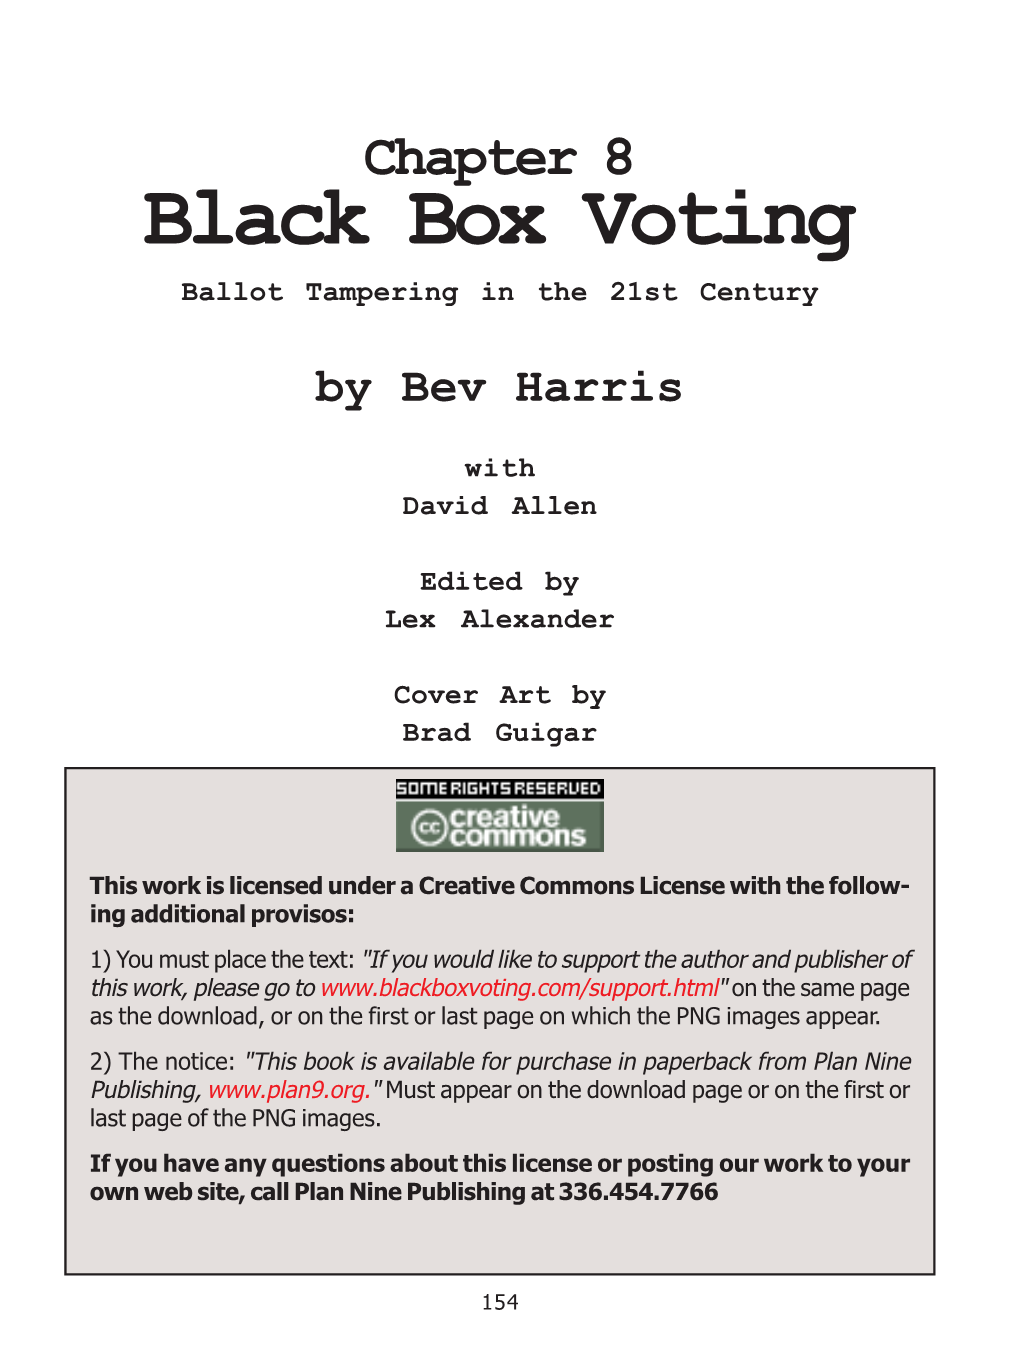 Black Box Voting Ballot Tampering in the 21St Century